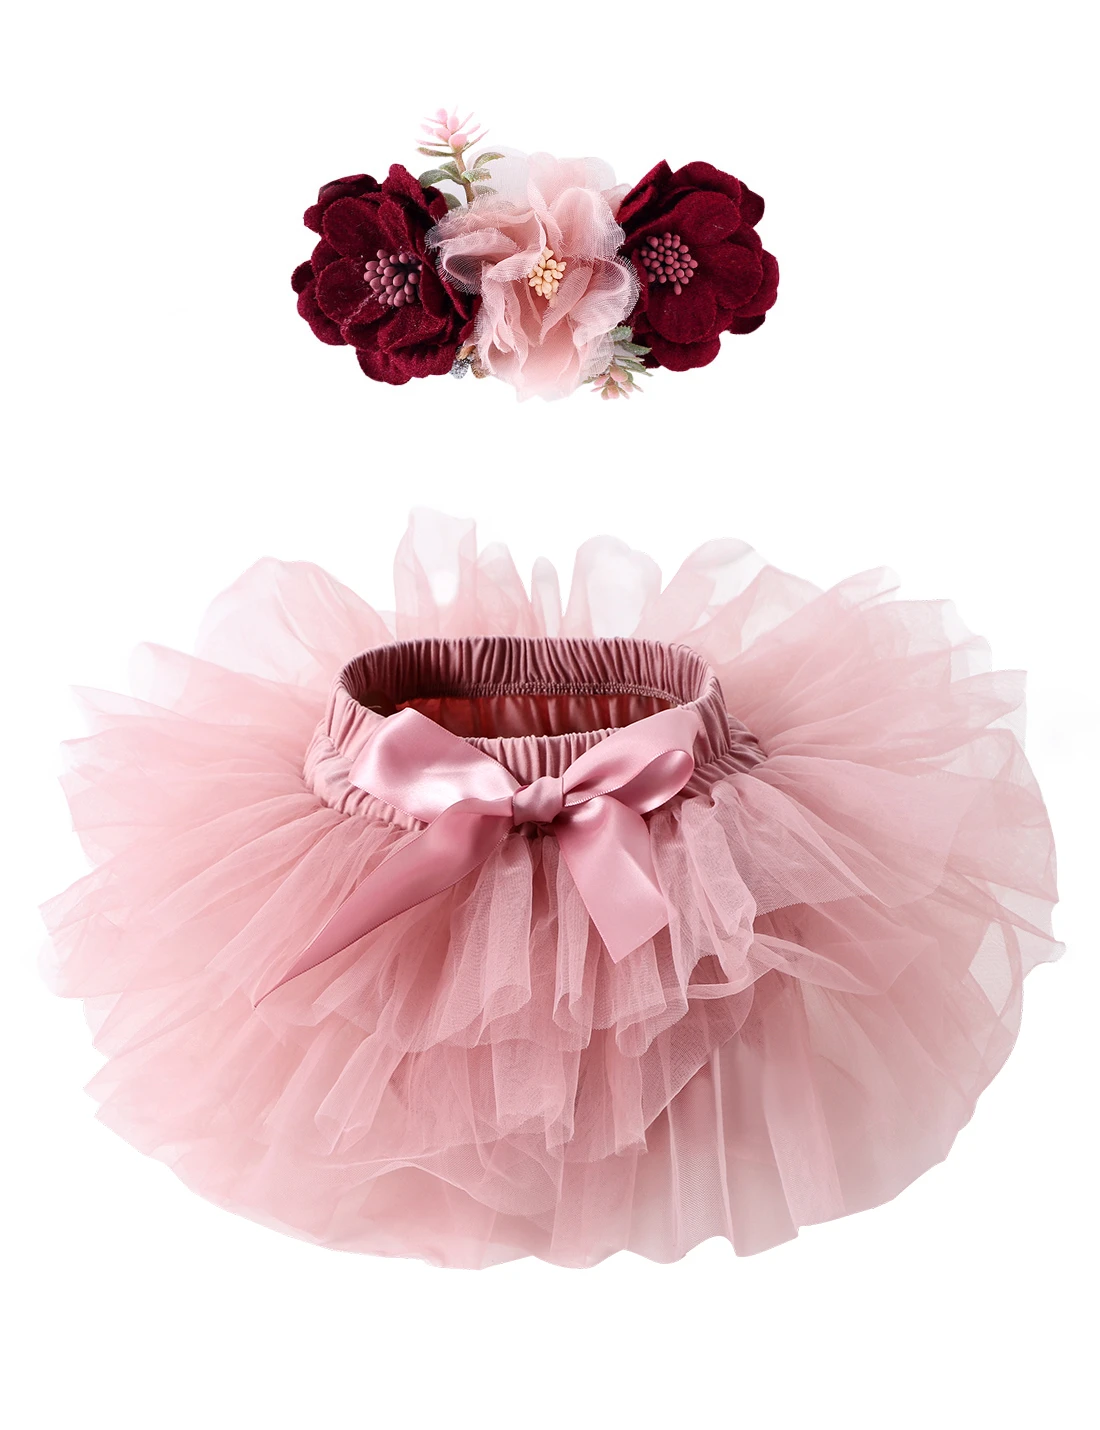 Baby Girls Tulle Bloomers Infant Newborn TuTu Diapers Cover 2pcs Short Skirts And Flower Headband Baby Party Photograph Clothes